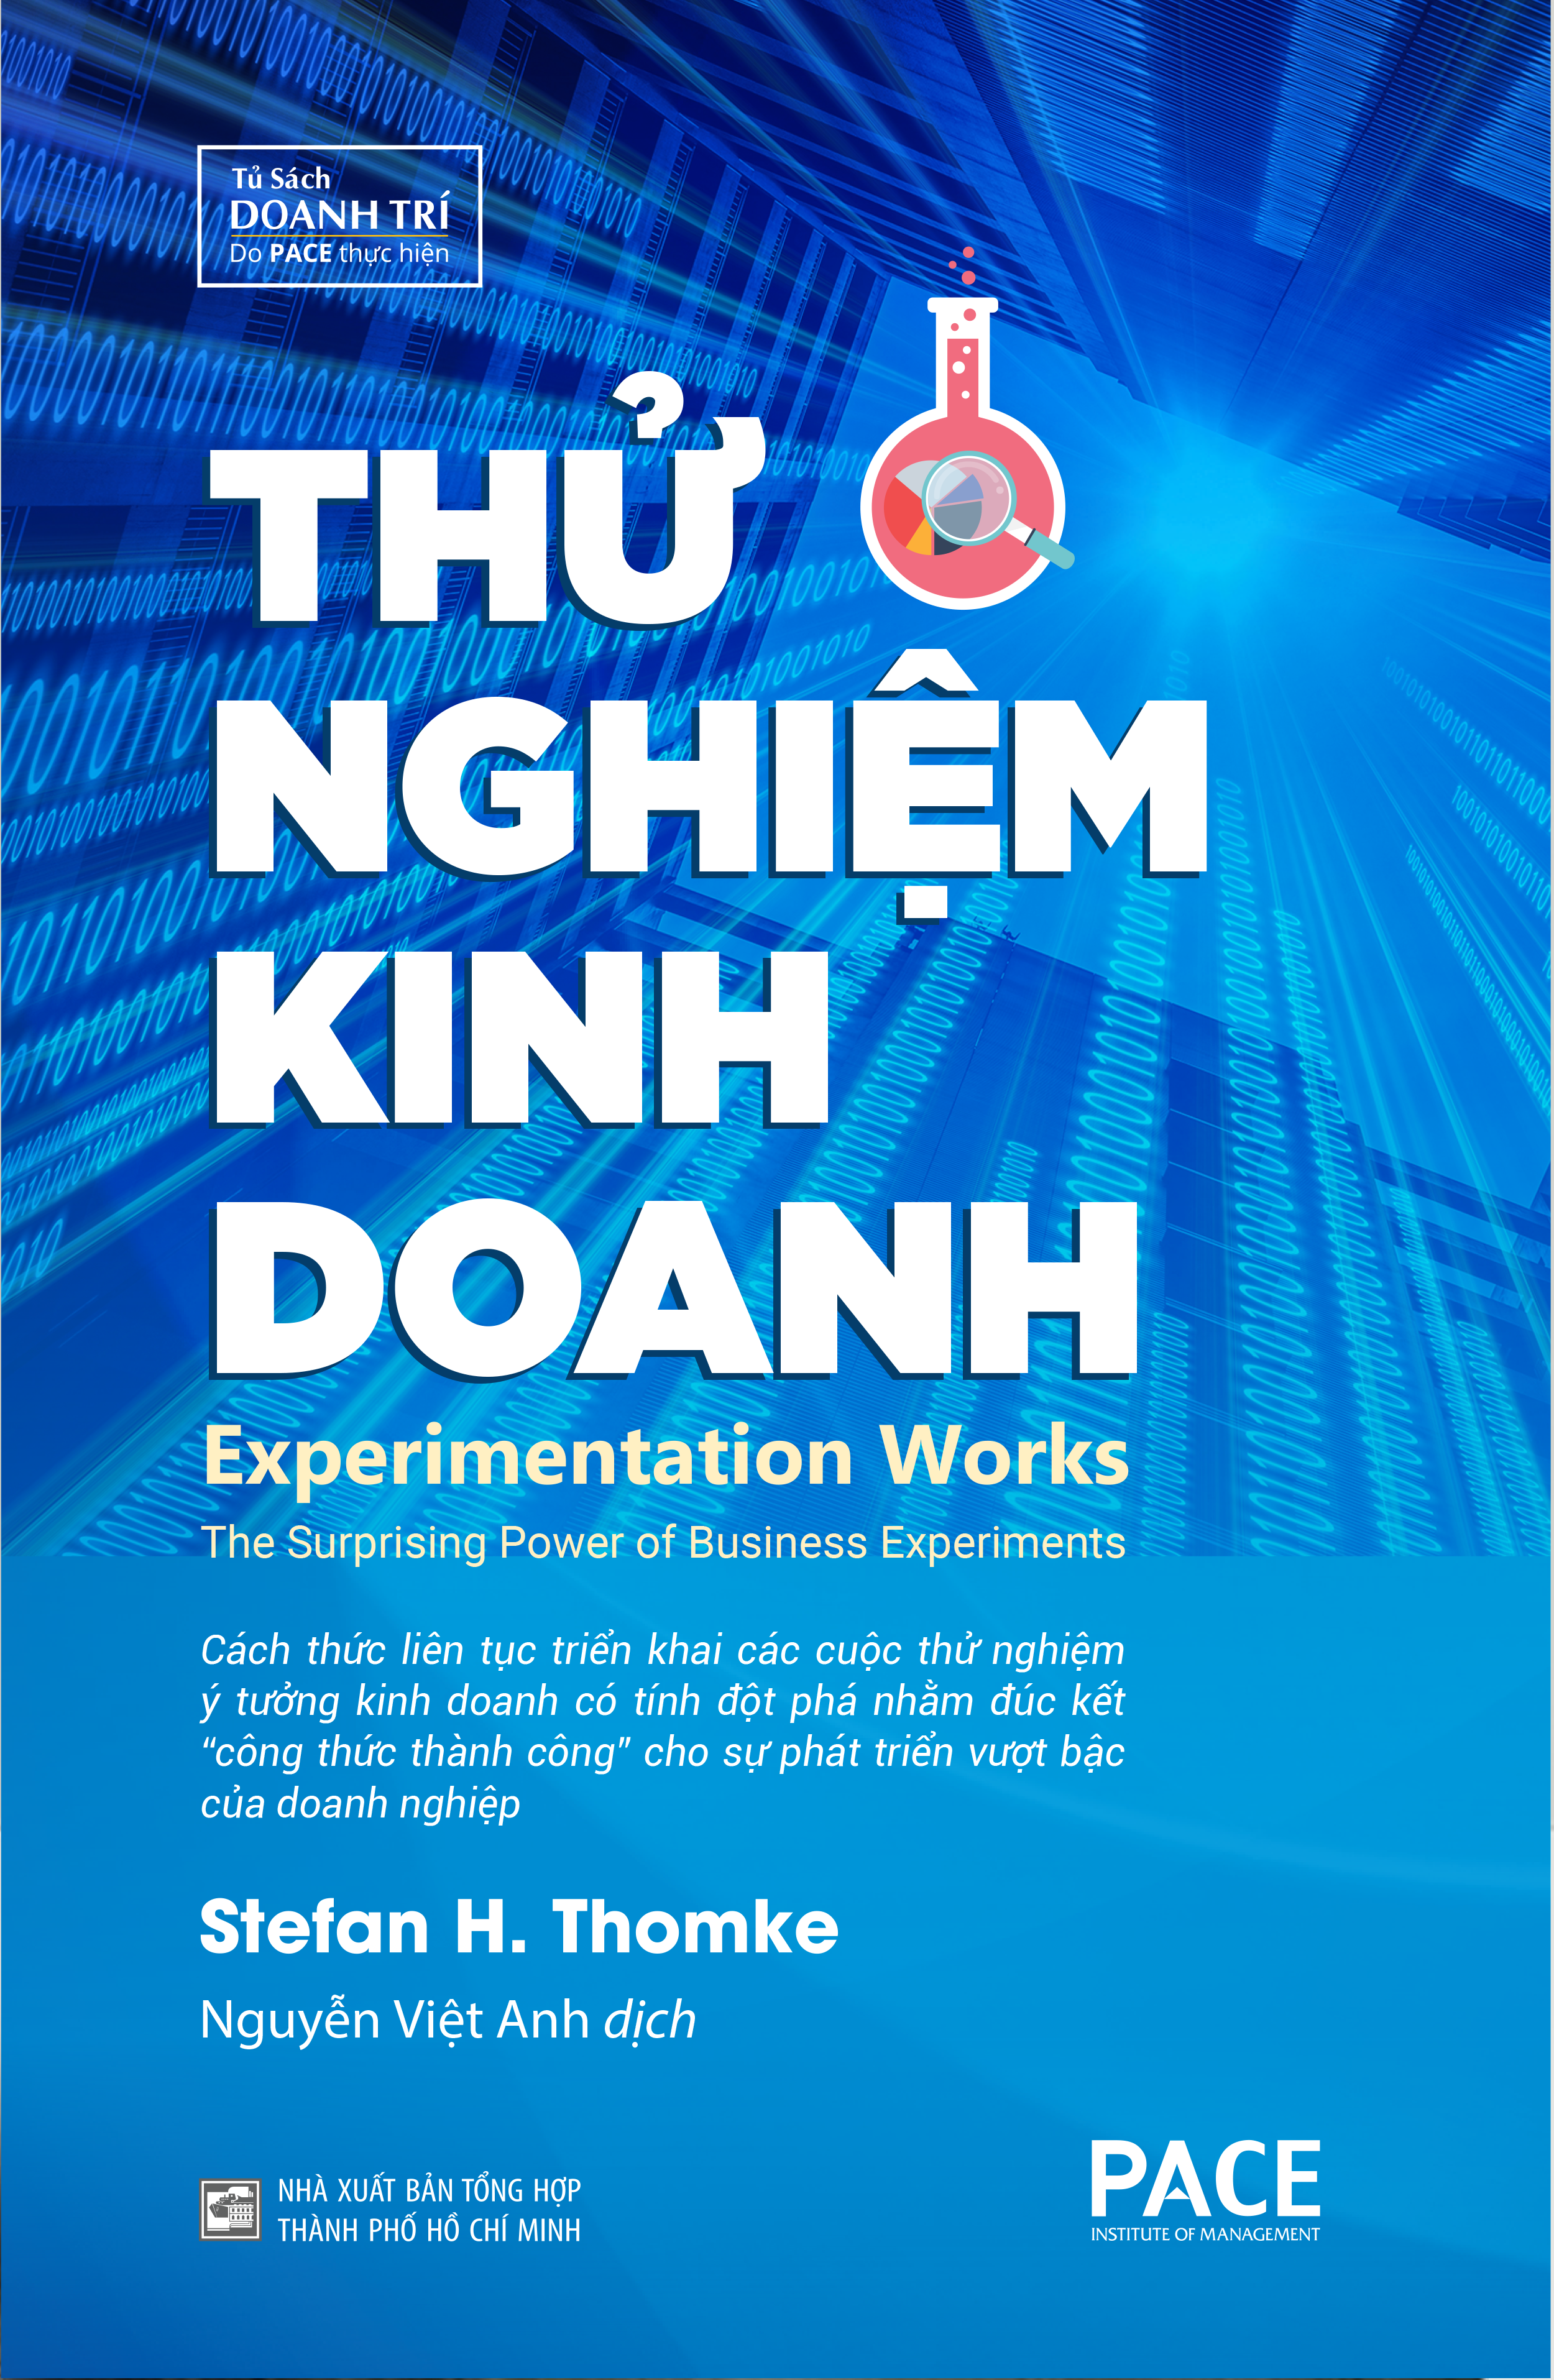 Sách PACE Books - Thử nghiệm kinh doanh (Experimentation Works) - Stefan H. Thomke